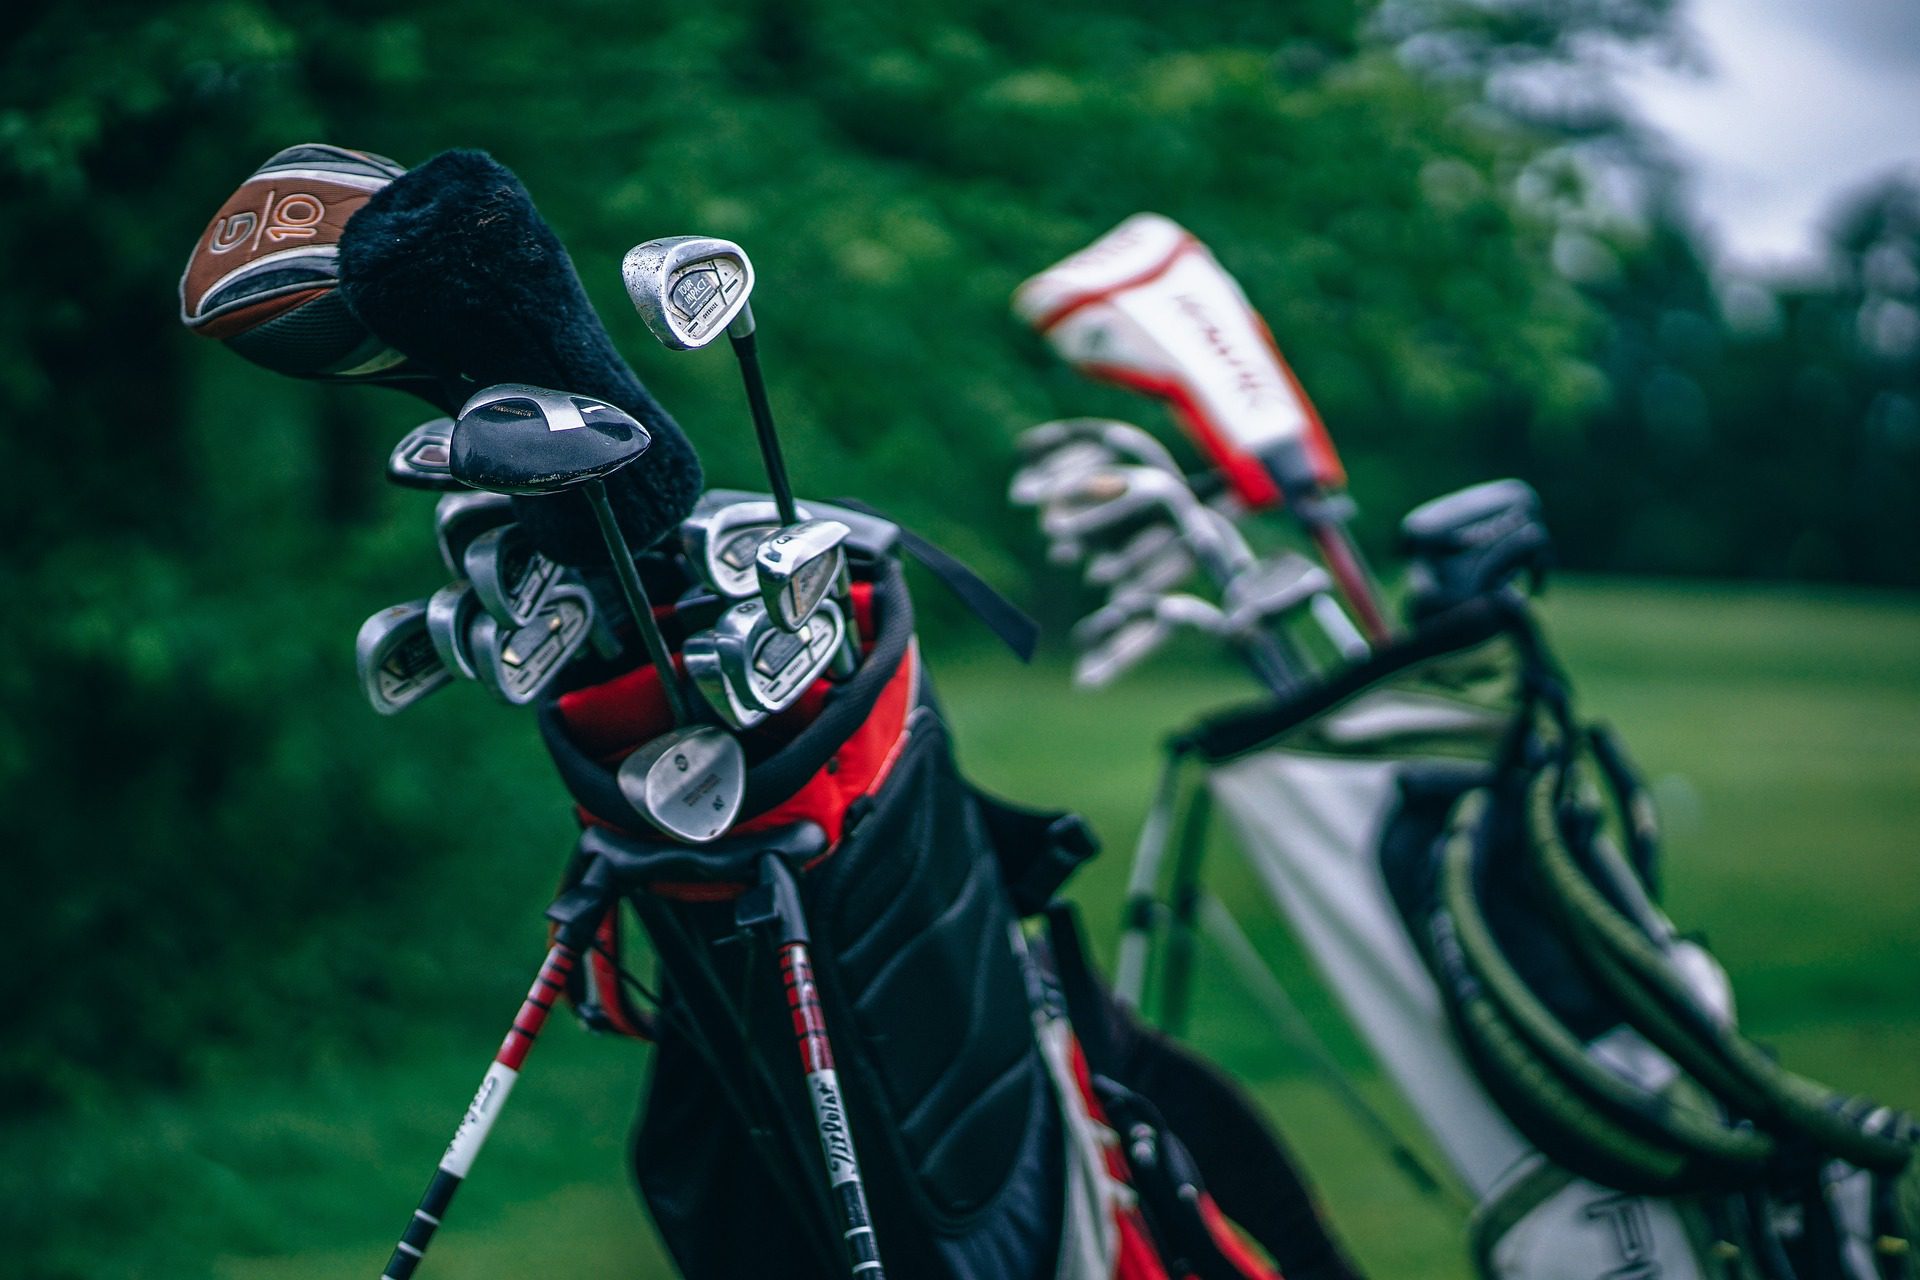 what is the best golf clubs for beginners